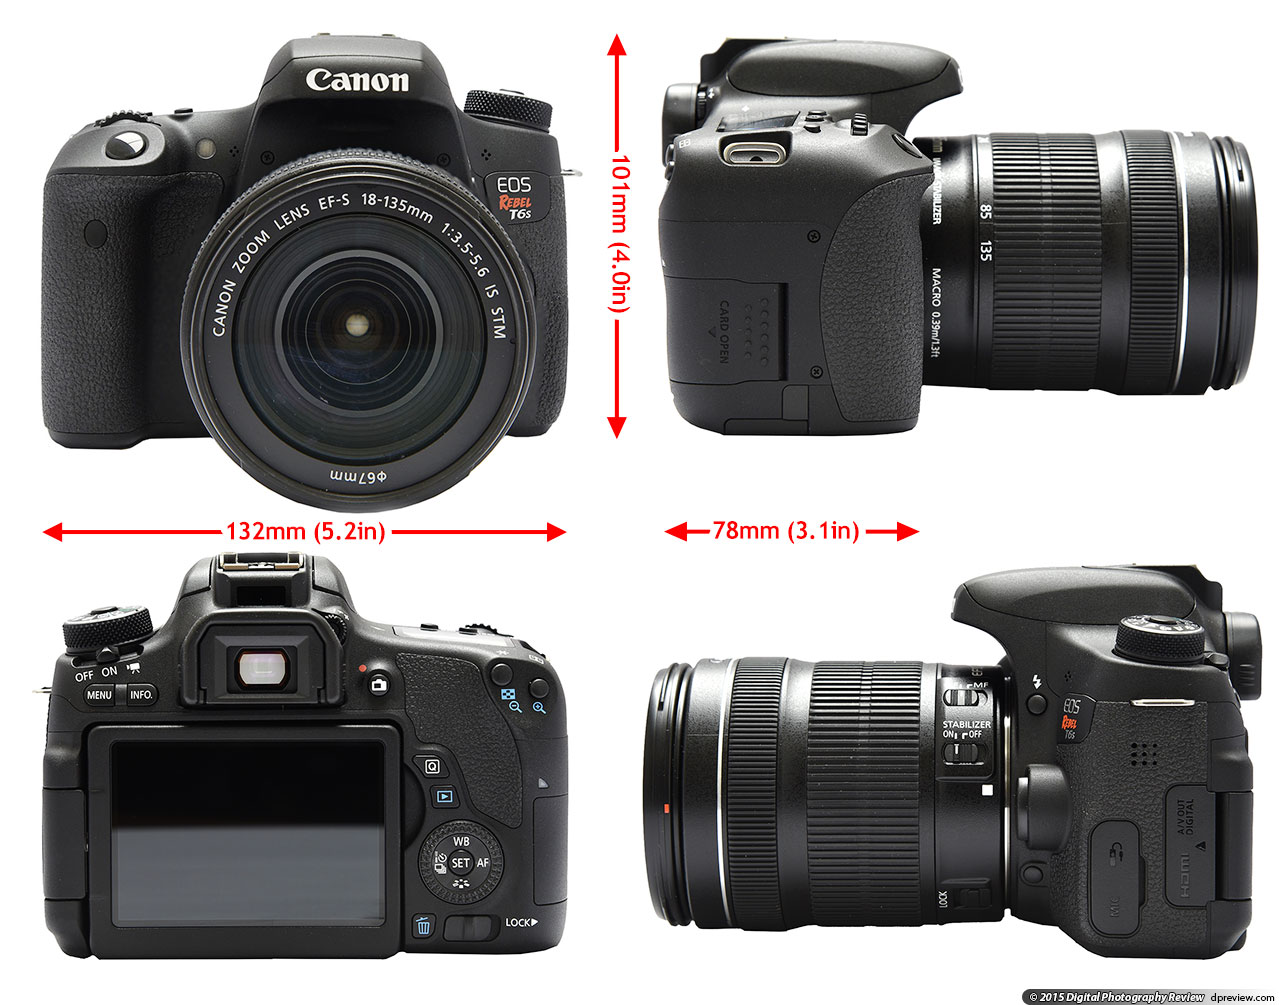 canon eos rebel t6i review